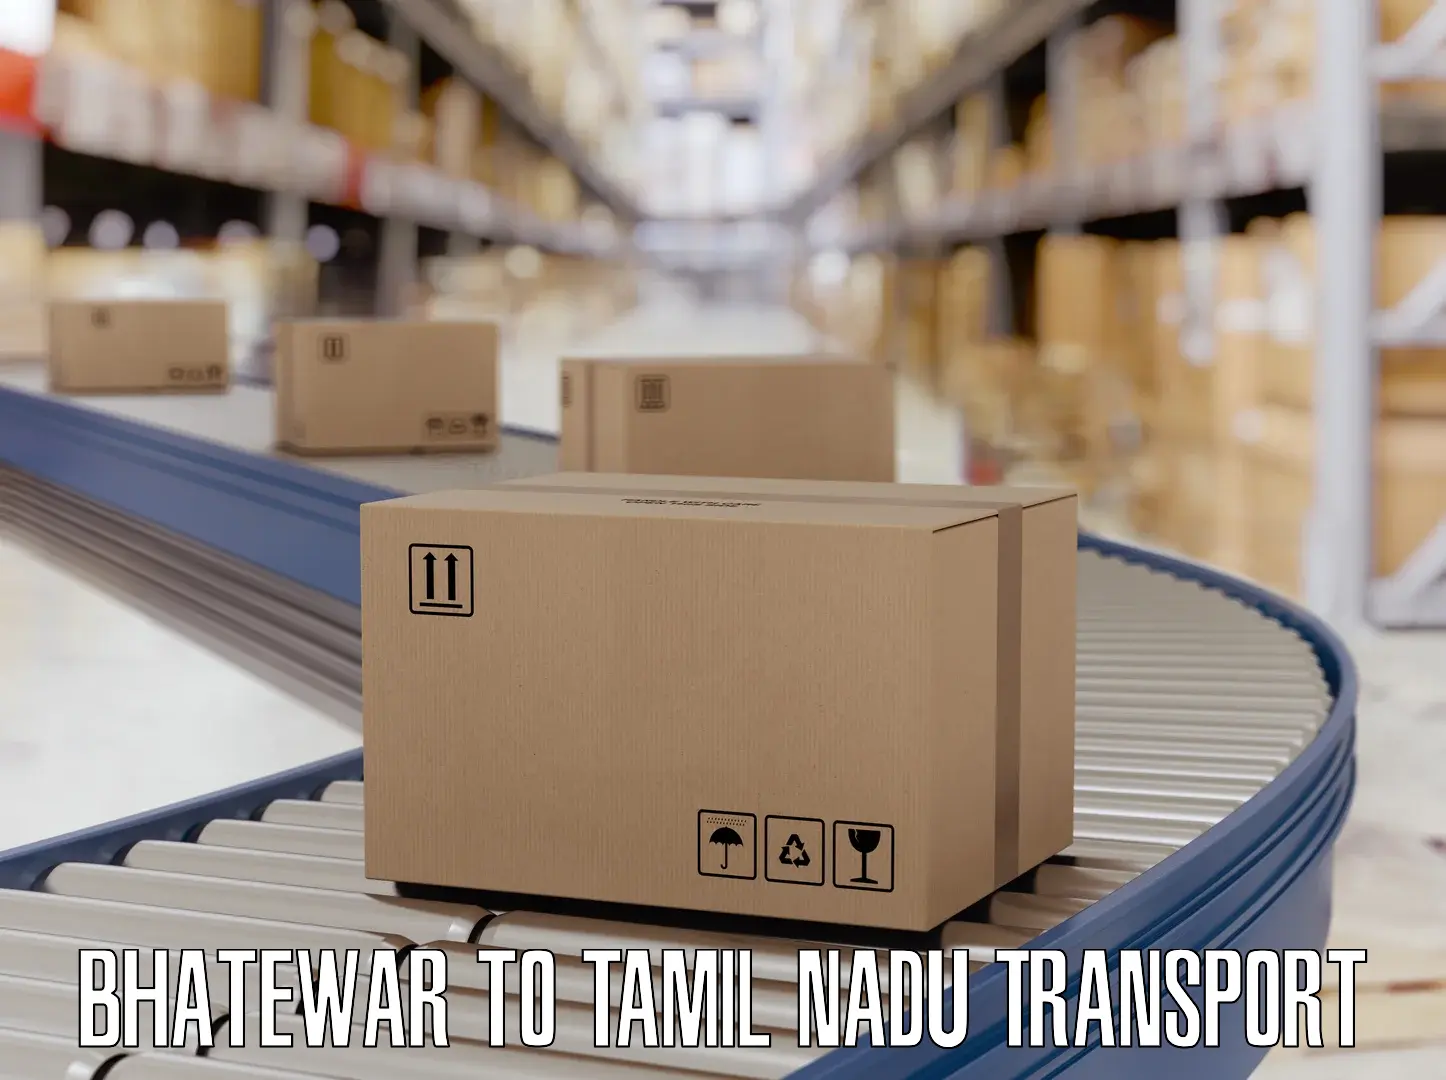 Domestic goods transportation services Bhatewar to Dindigul